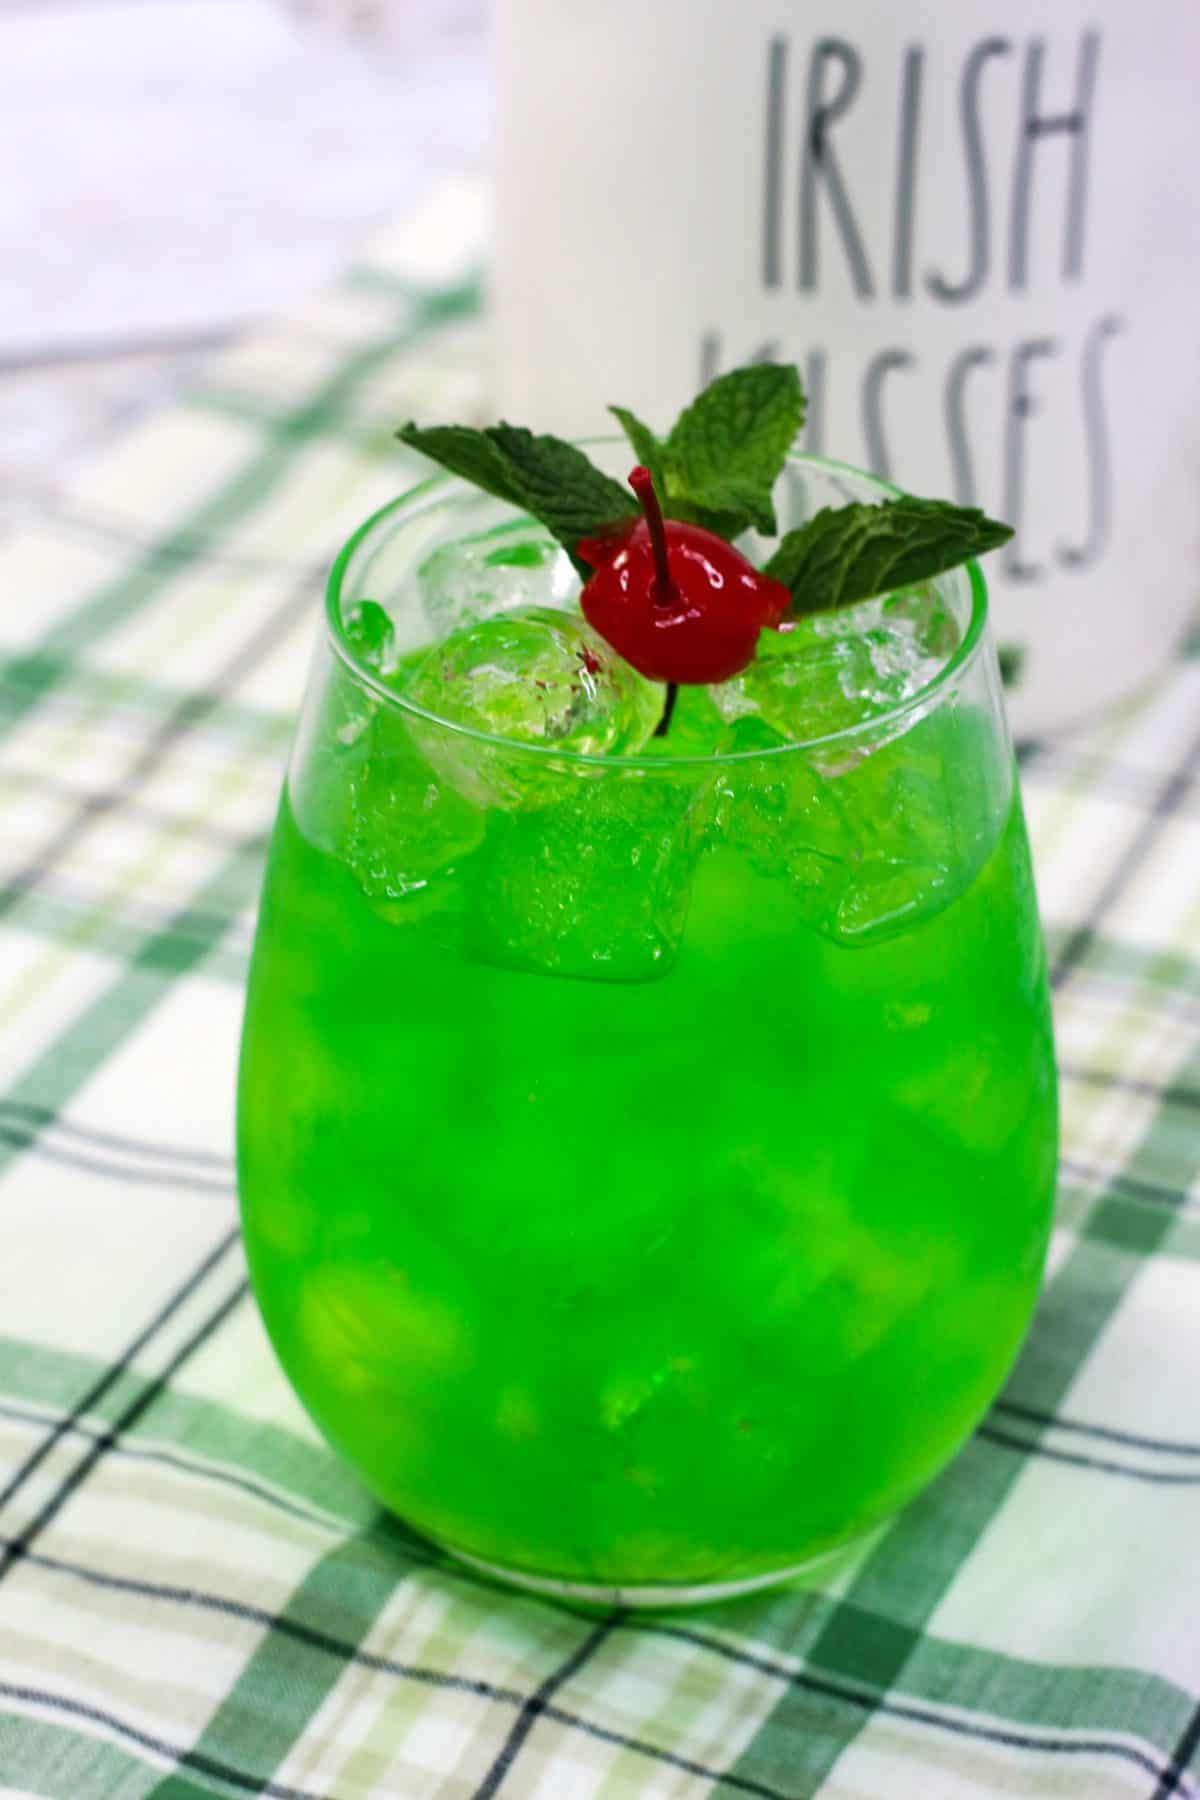 luck of the irish cocktail, Green cocktail recipe